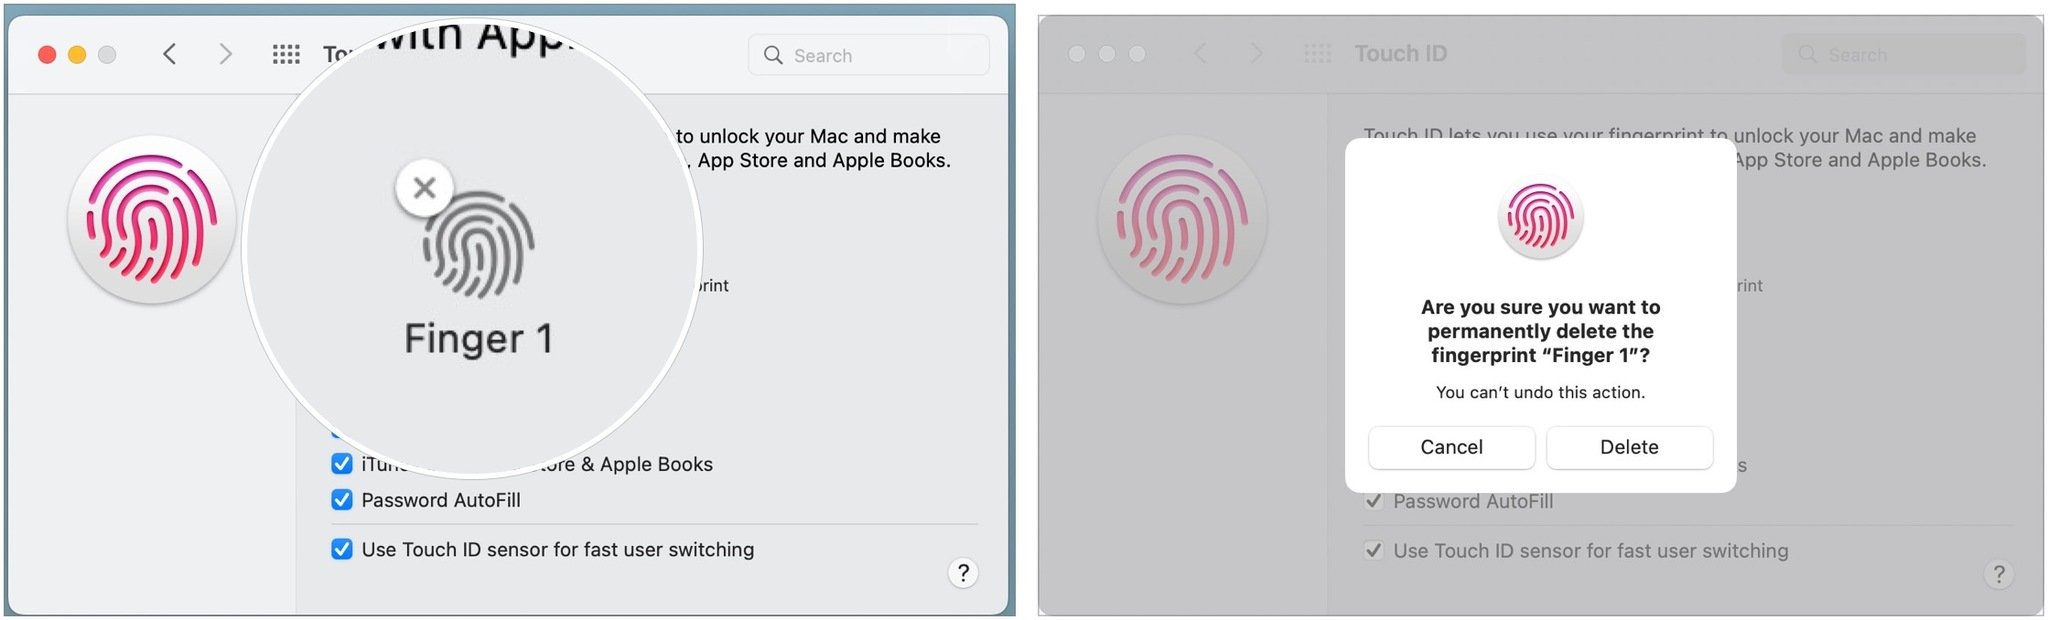 To delete and re-add your Touch ID fingerprints, hover over the fingerprint you wish to delete and click on the X. Enter your password and then confirm that you want to delete the Touch ID.